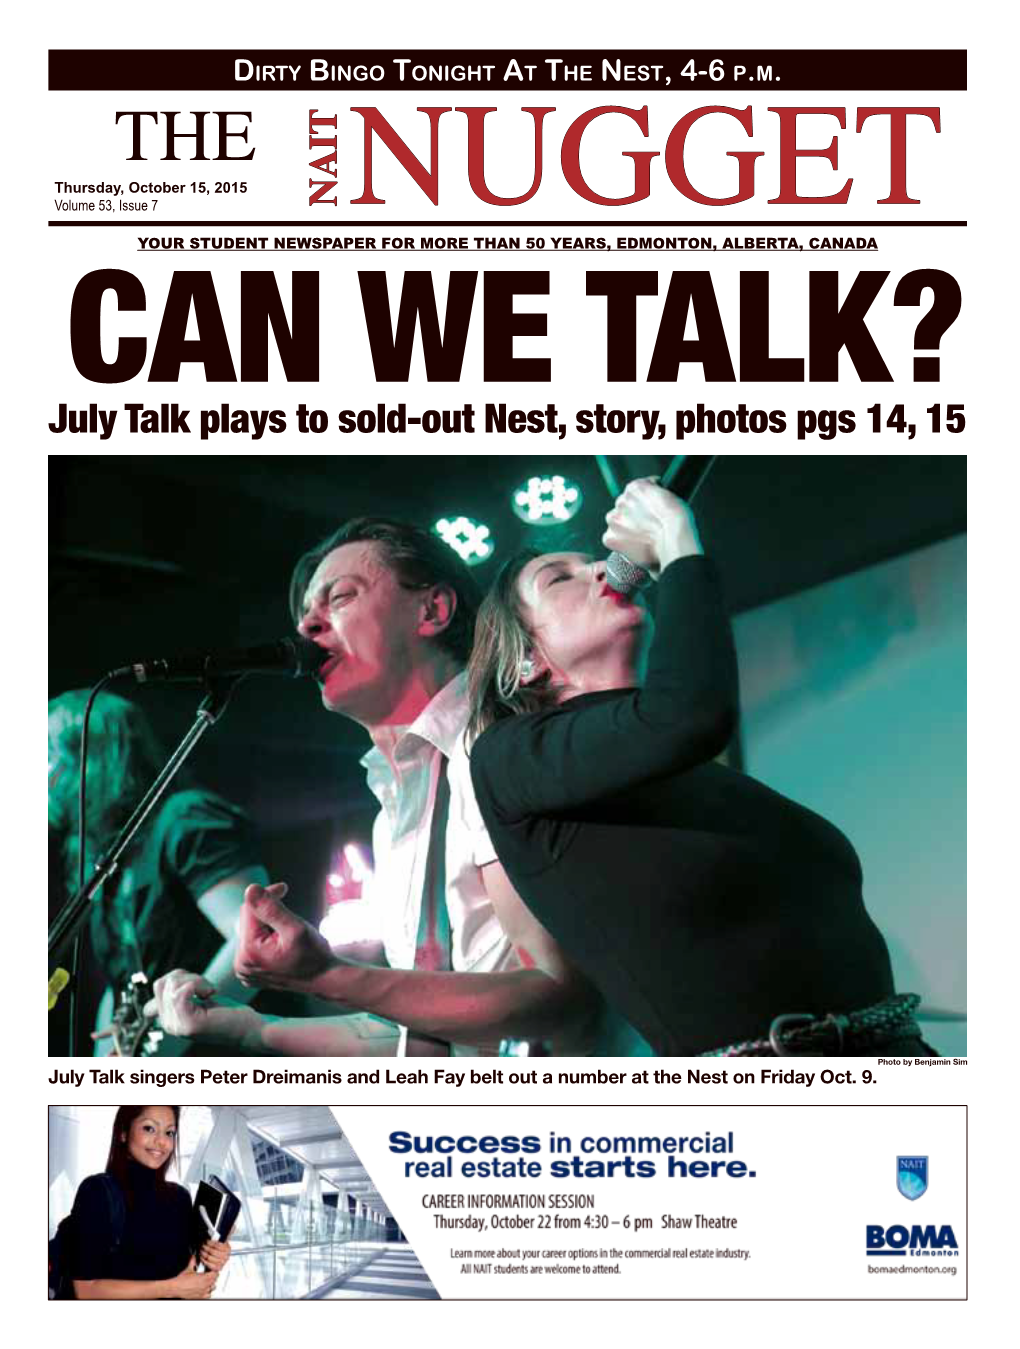 July Talk Plays to Sold-Out Nest, Story, Photos Pgs 14, 15